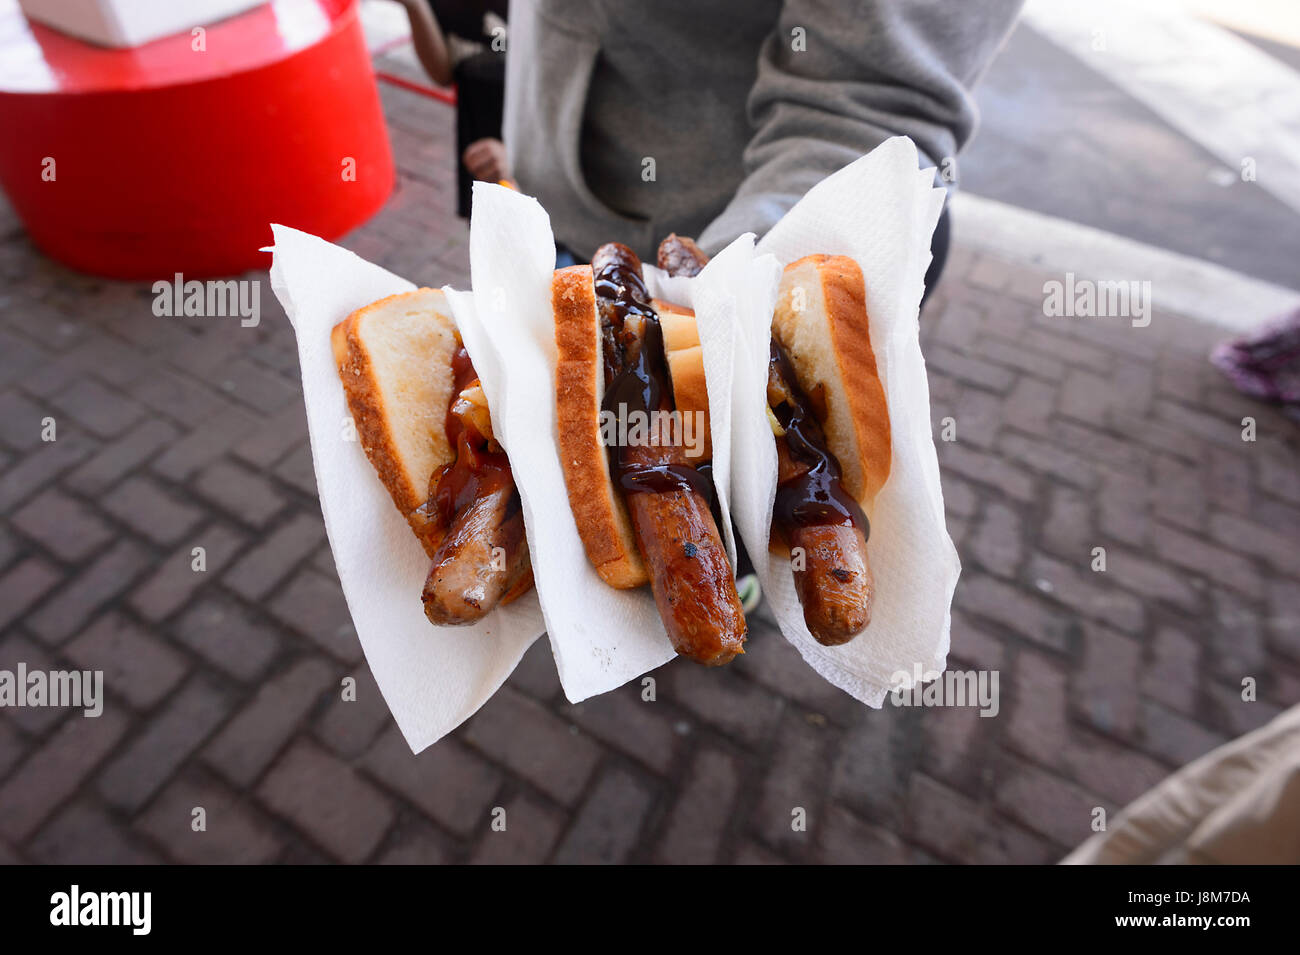 Bunnings Warehouse Sausage Sizzle for Fund Raising, New South Wales, NSW, Australia Stock Photo